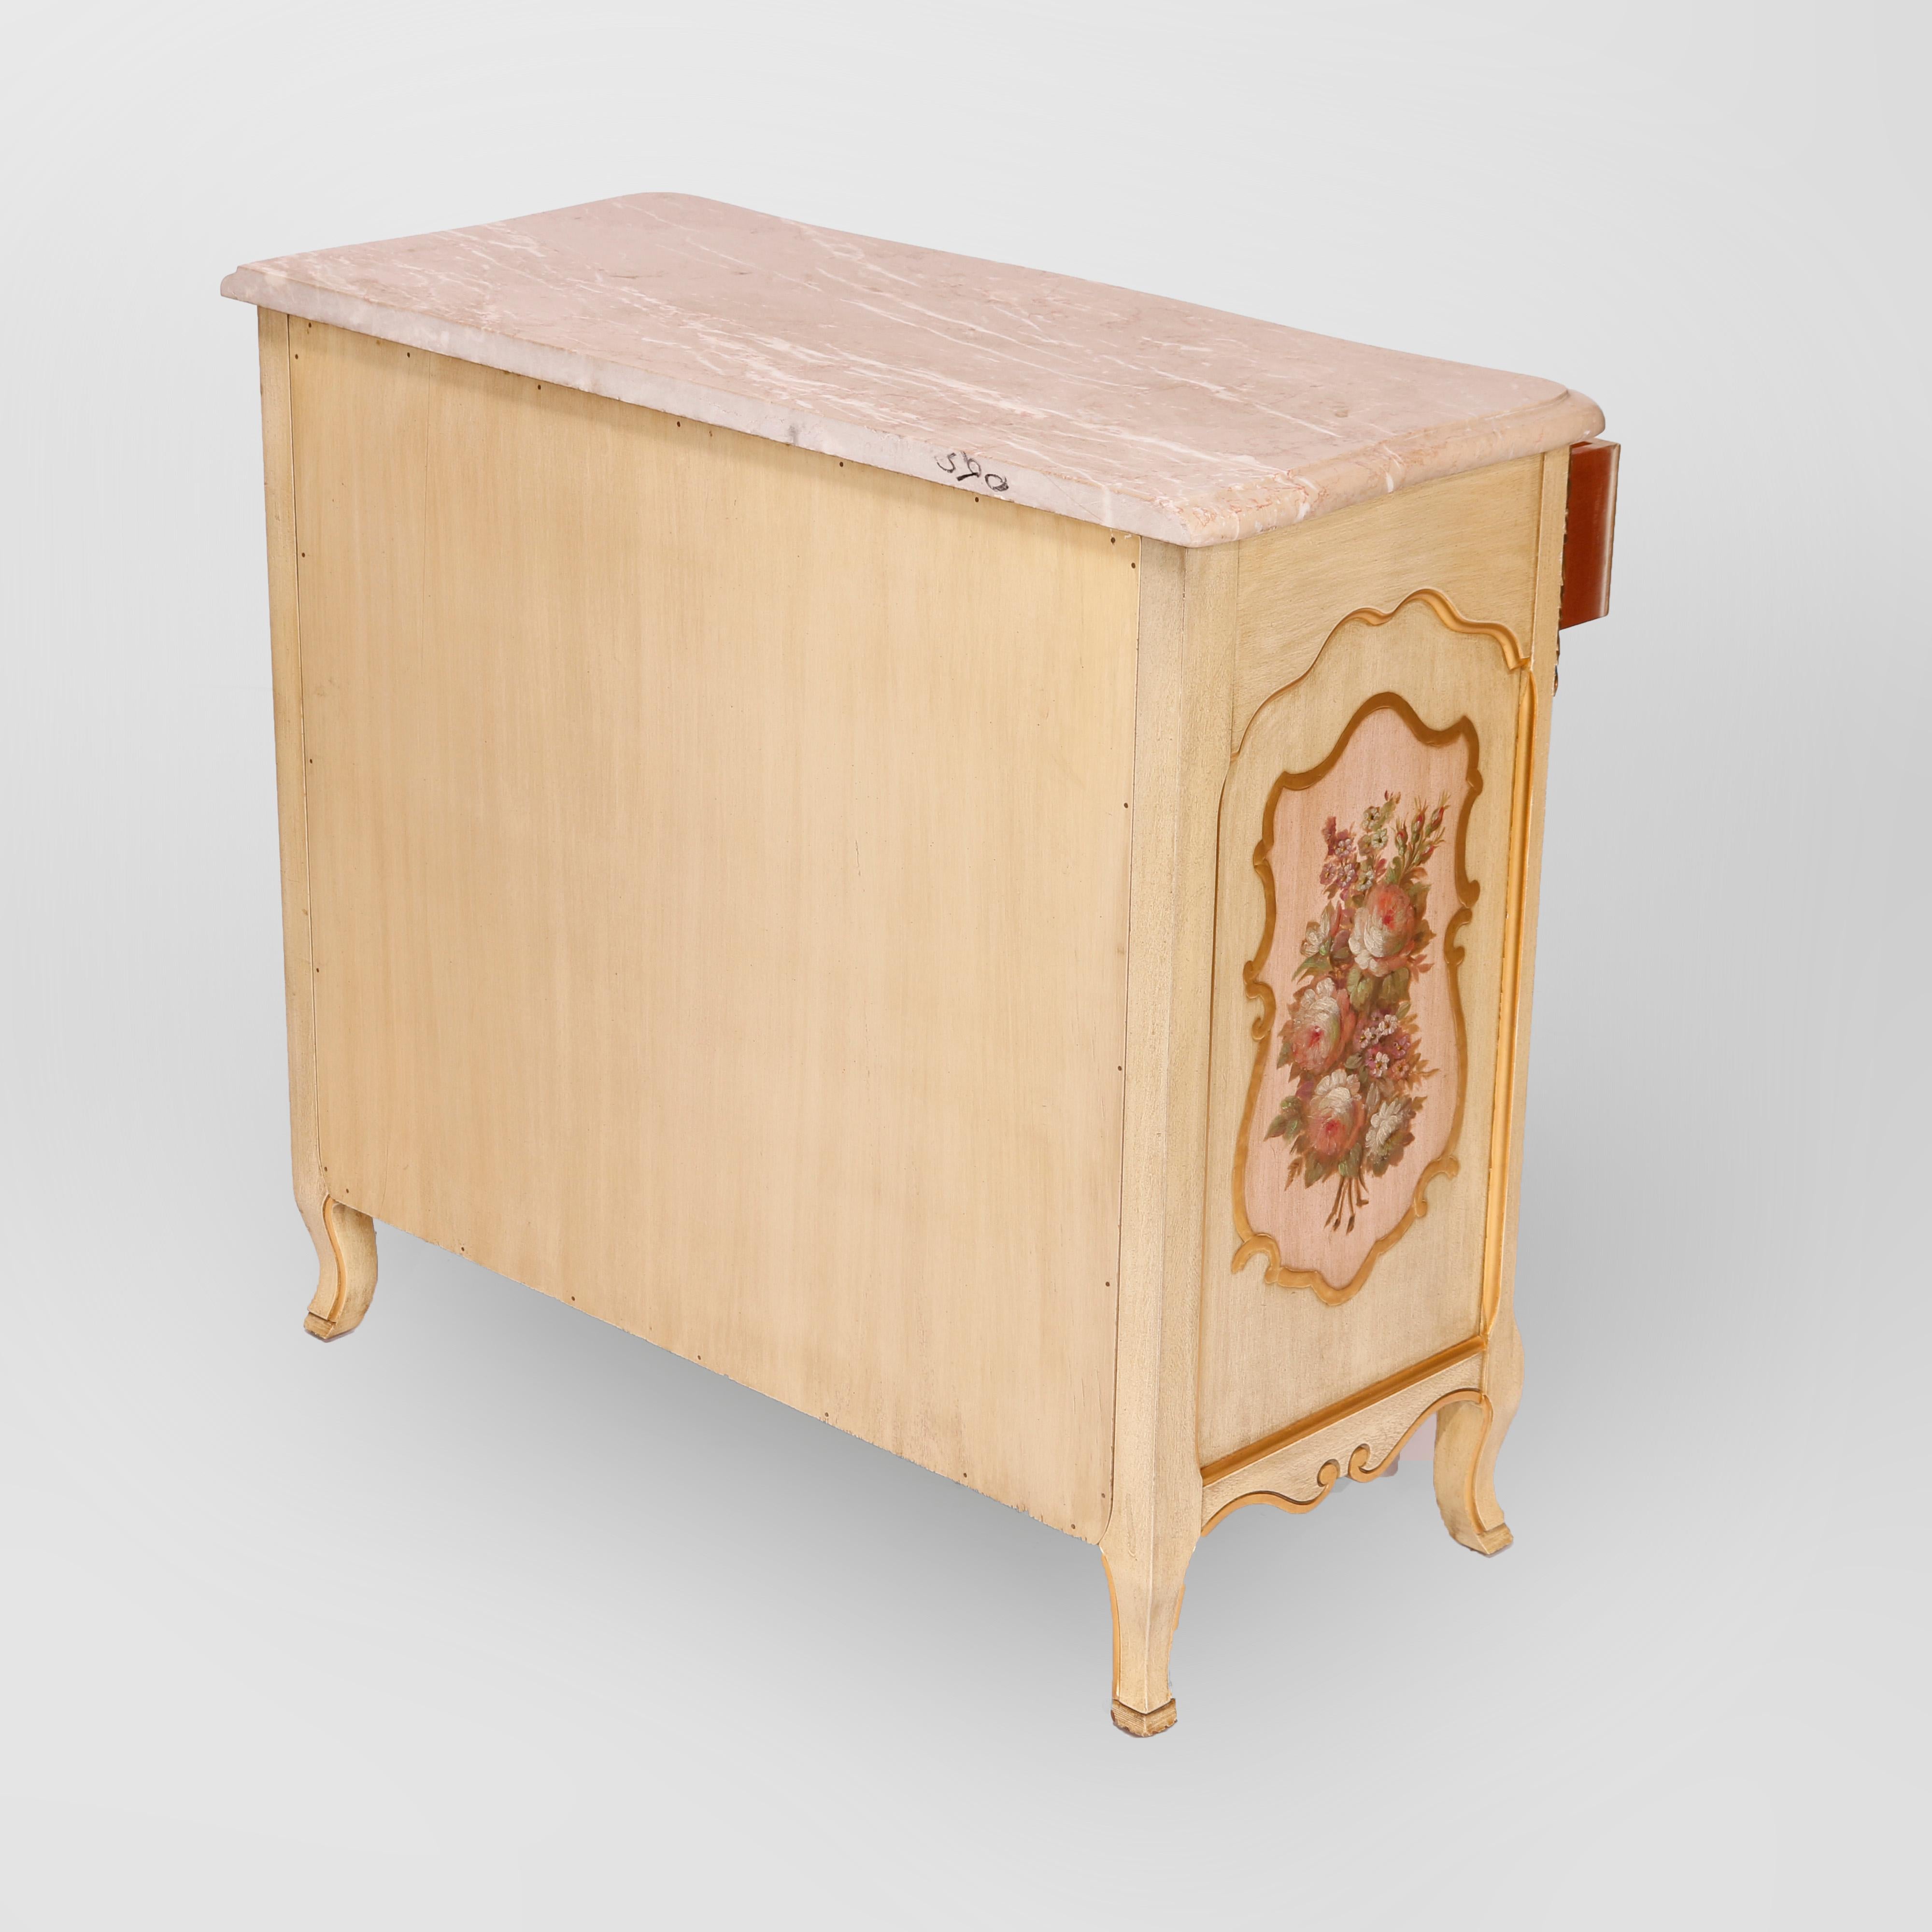 French Provincial Style Polychrome, Gilt &Marble Commode by Kozak Studios 20th C For Sale 8